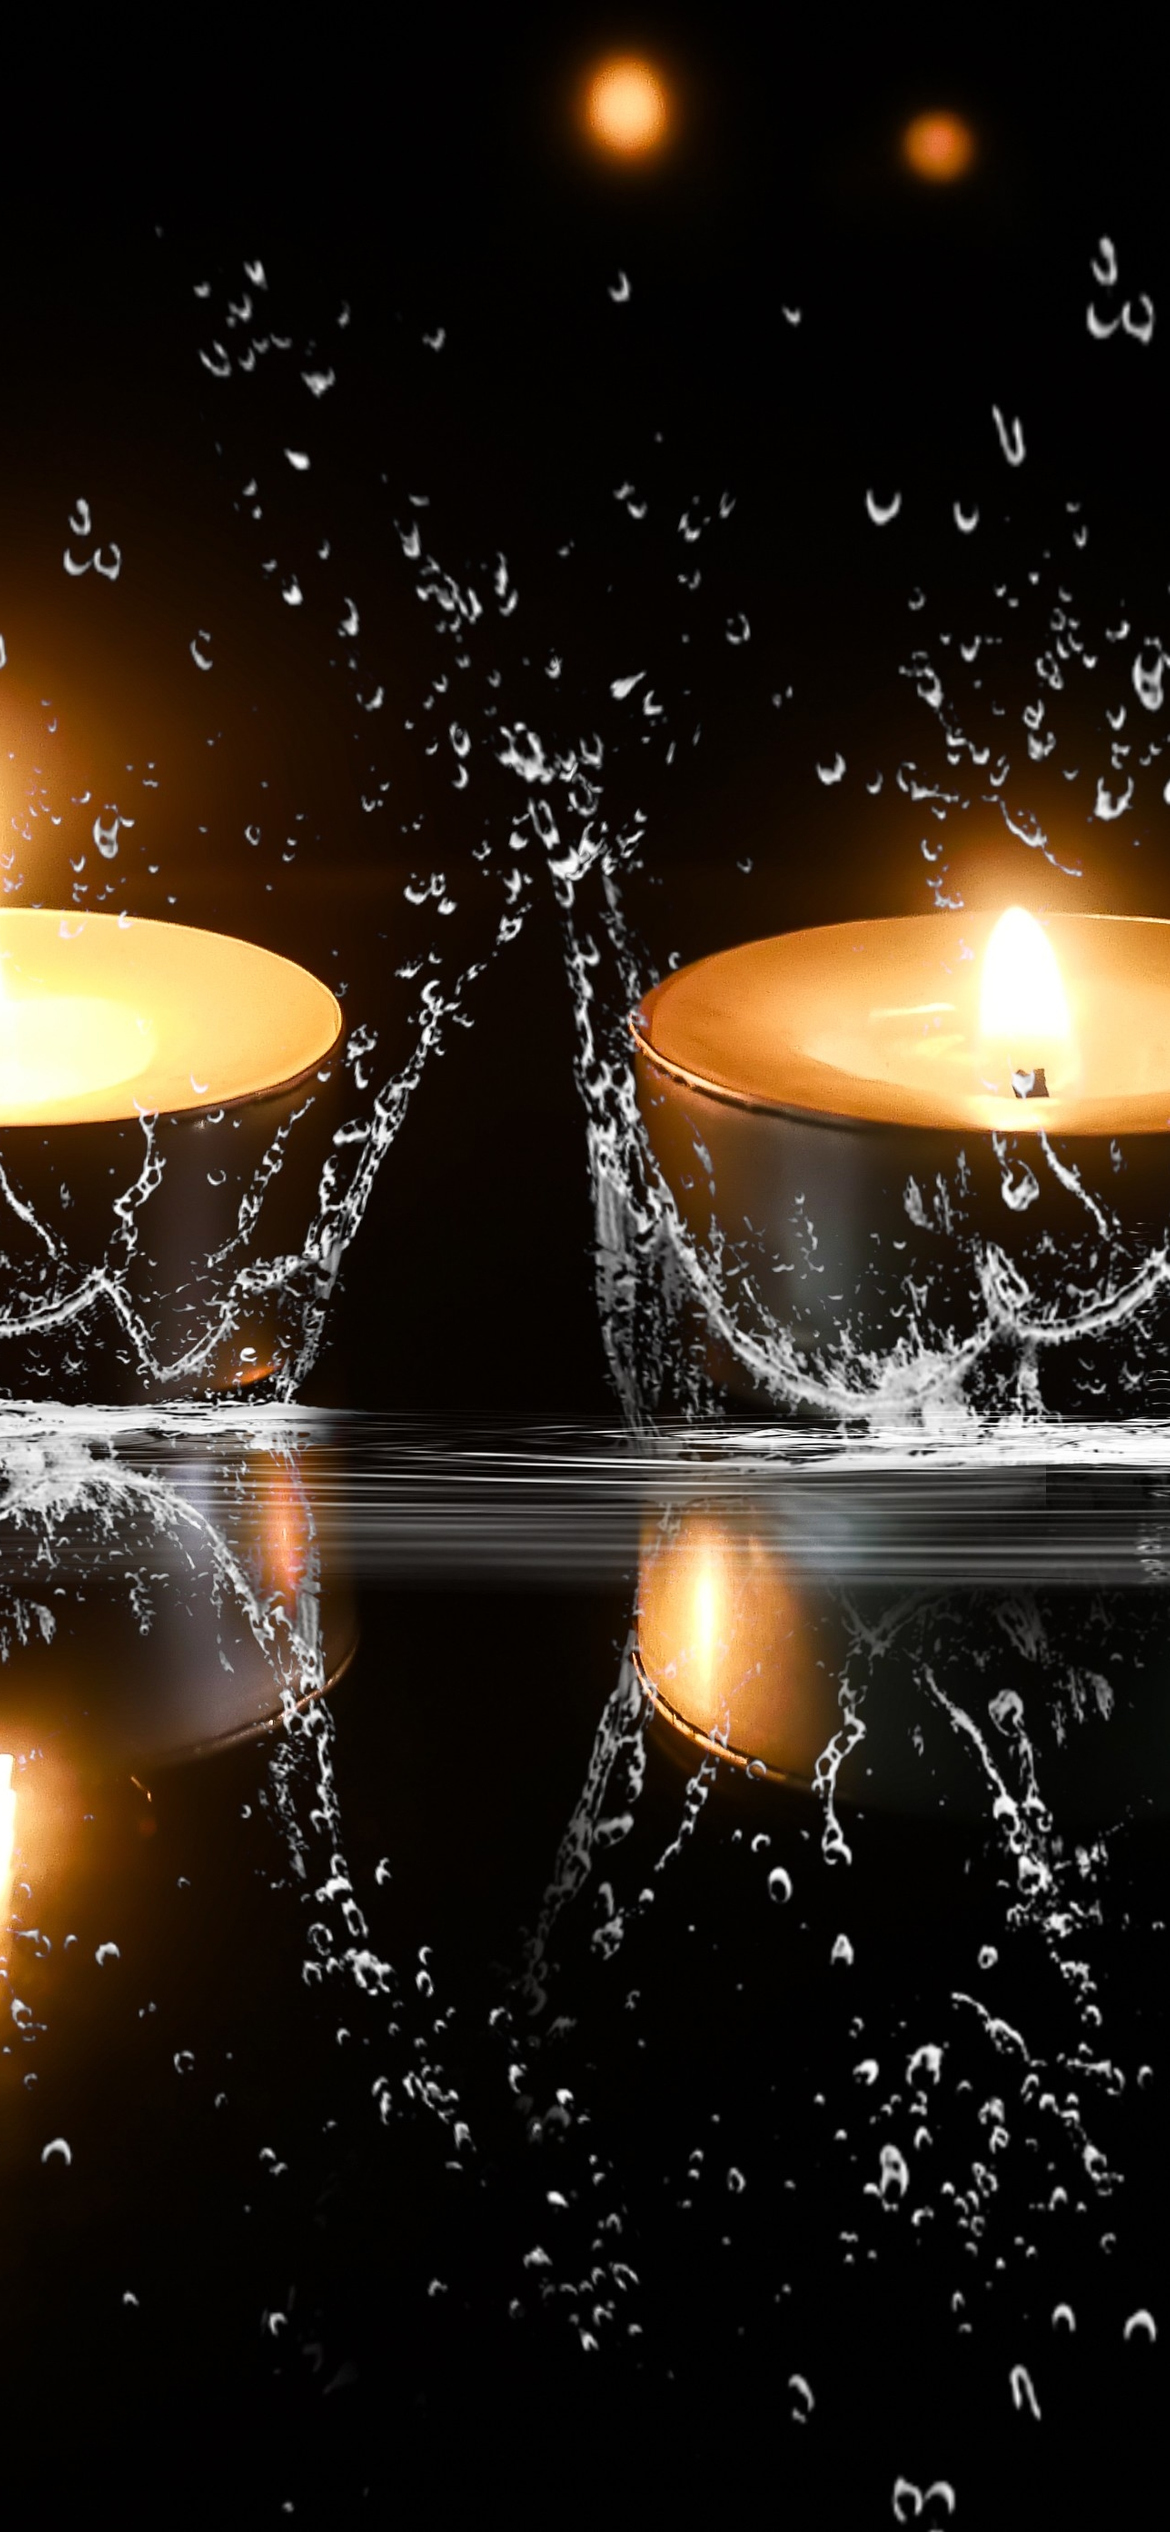 Download Candle, Fire, Water, Photoshop Wallpaper in 1170x2532 Resolution